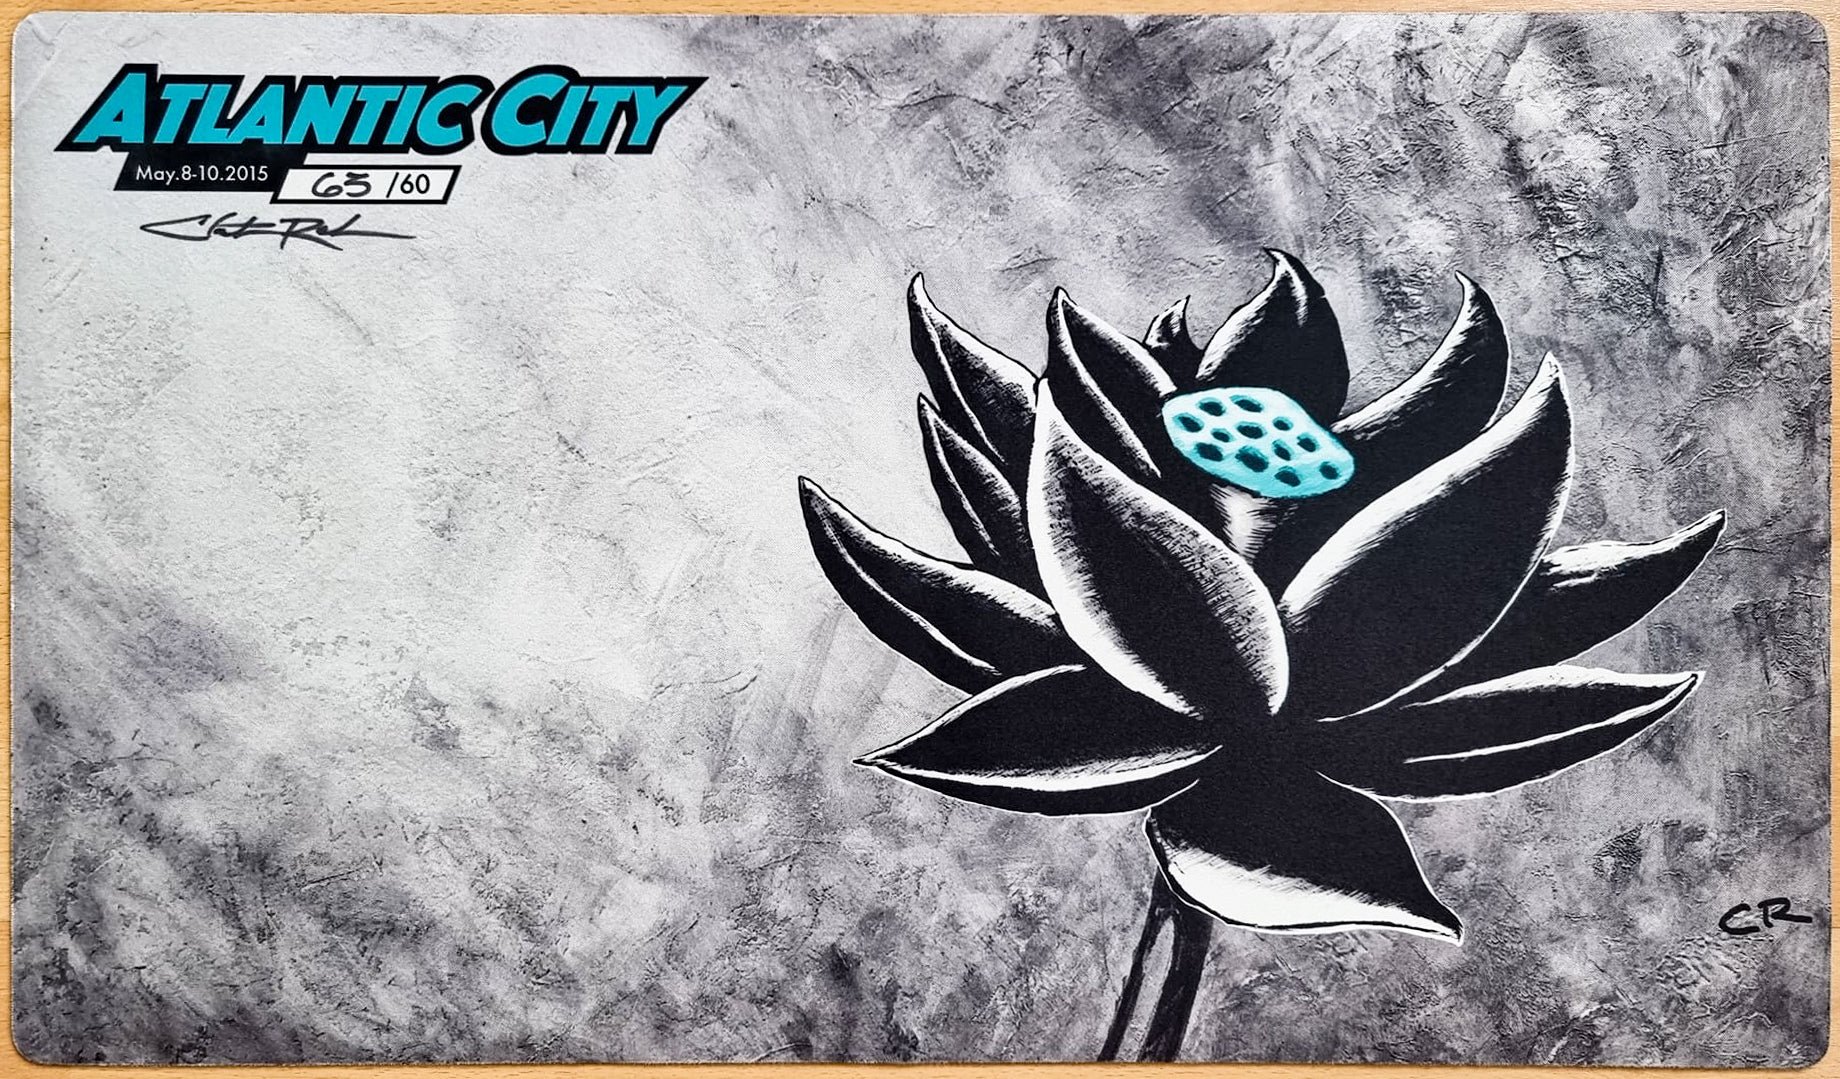 Black Lotus - Christopher Rush - Grand Prix Atlantic City 2015 - Signed by the Artist - Limited Edition [Around 70 Copies] - MTG Playmat